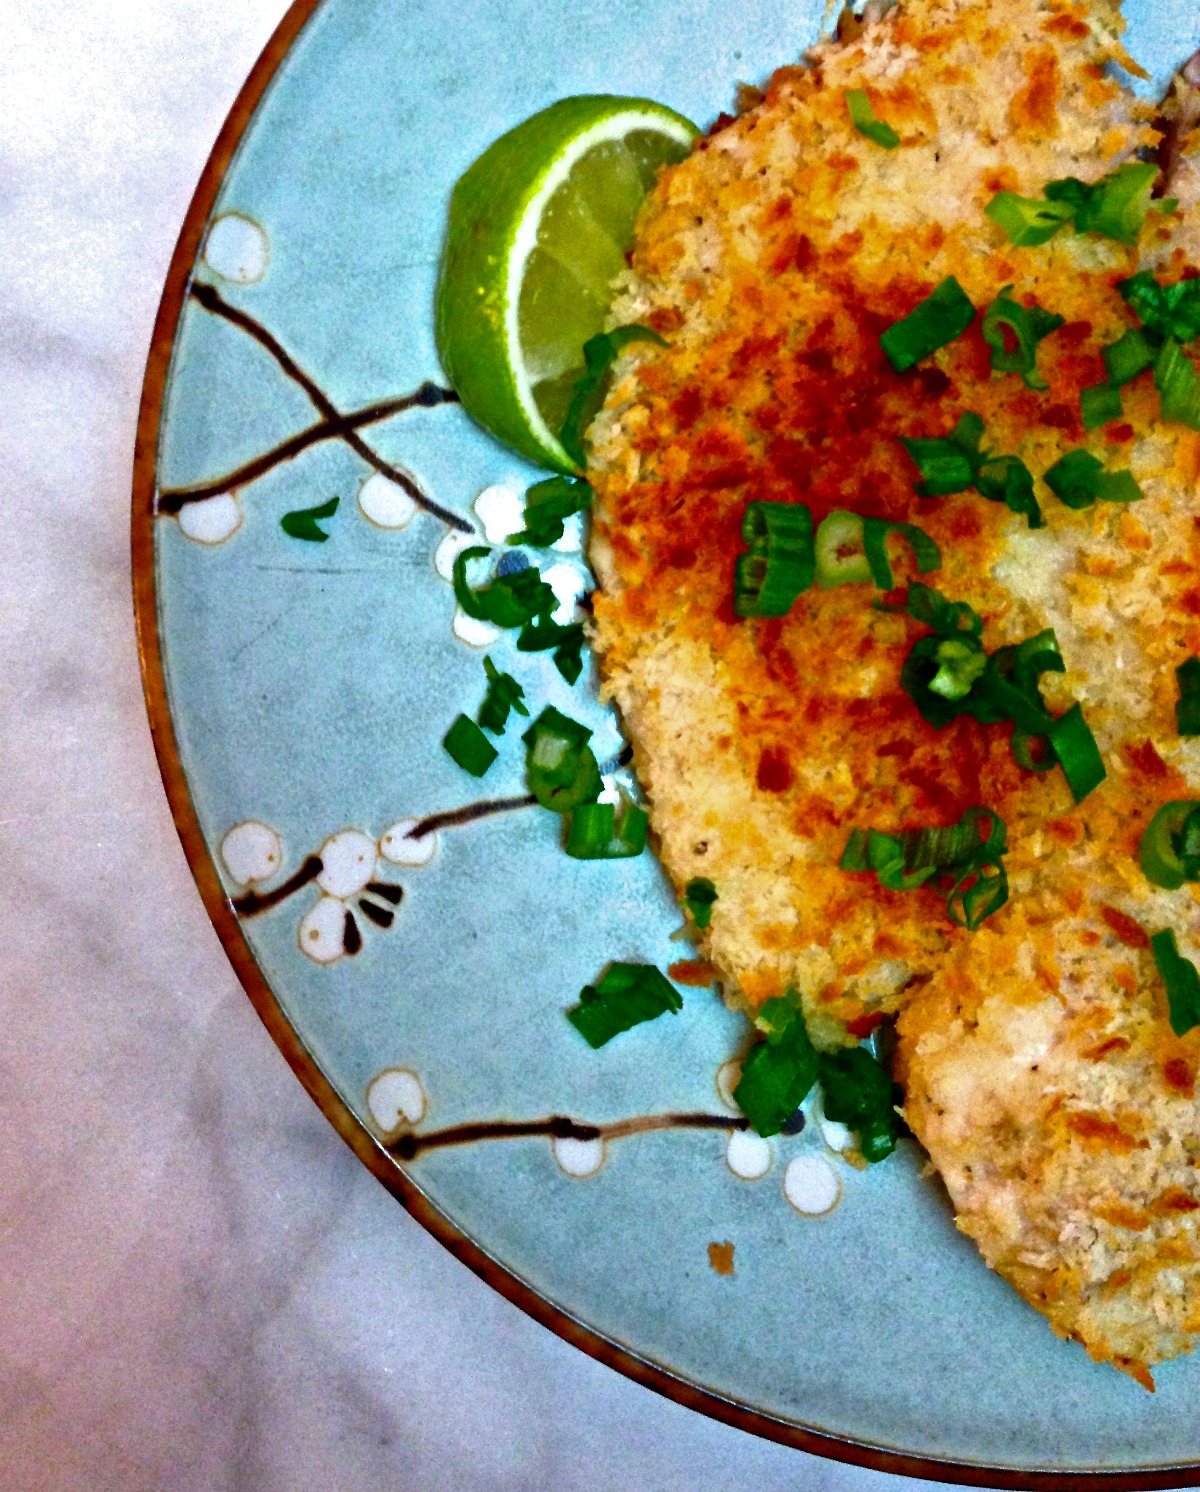 healthy baked fish with crunchy crumbs :: by radish*rose